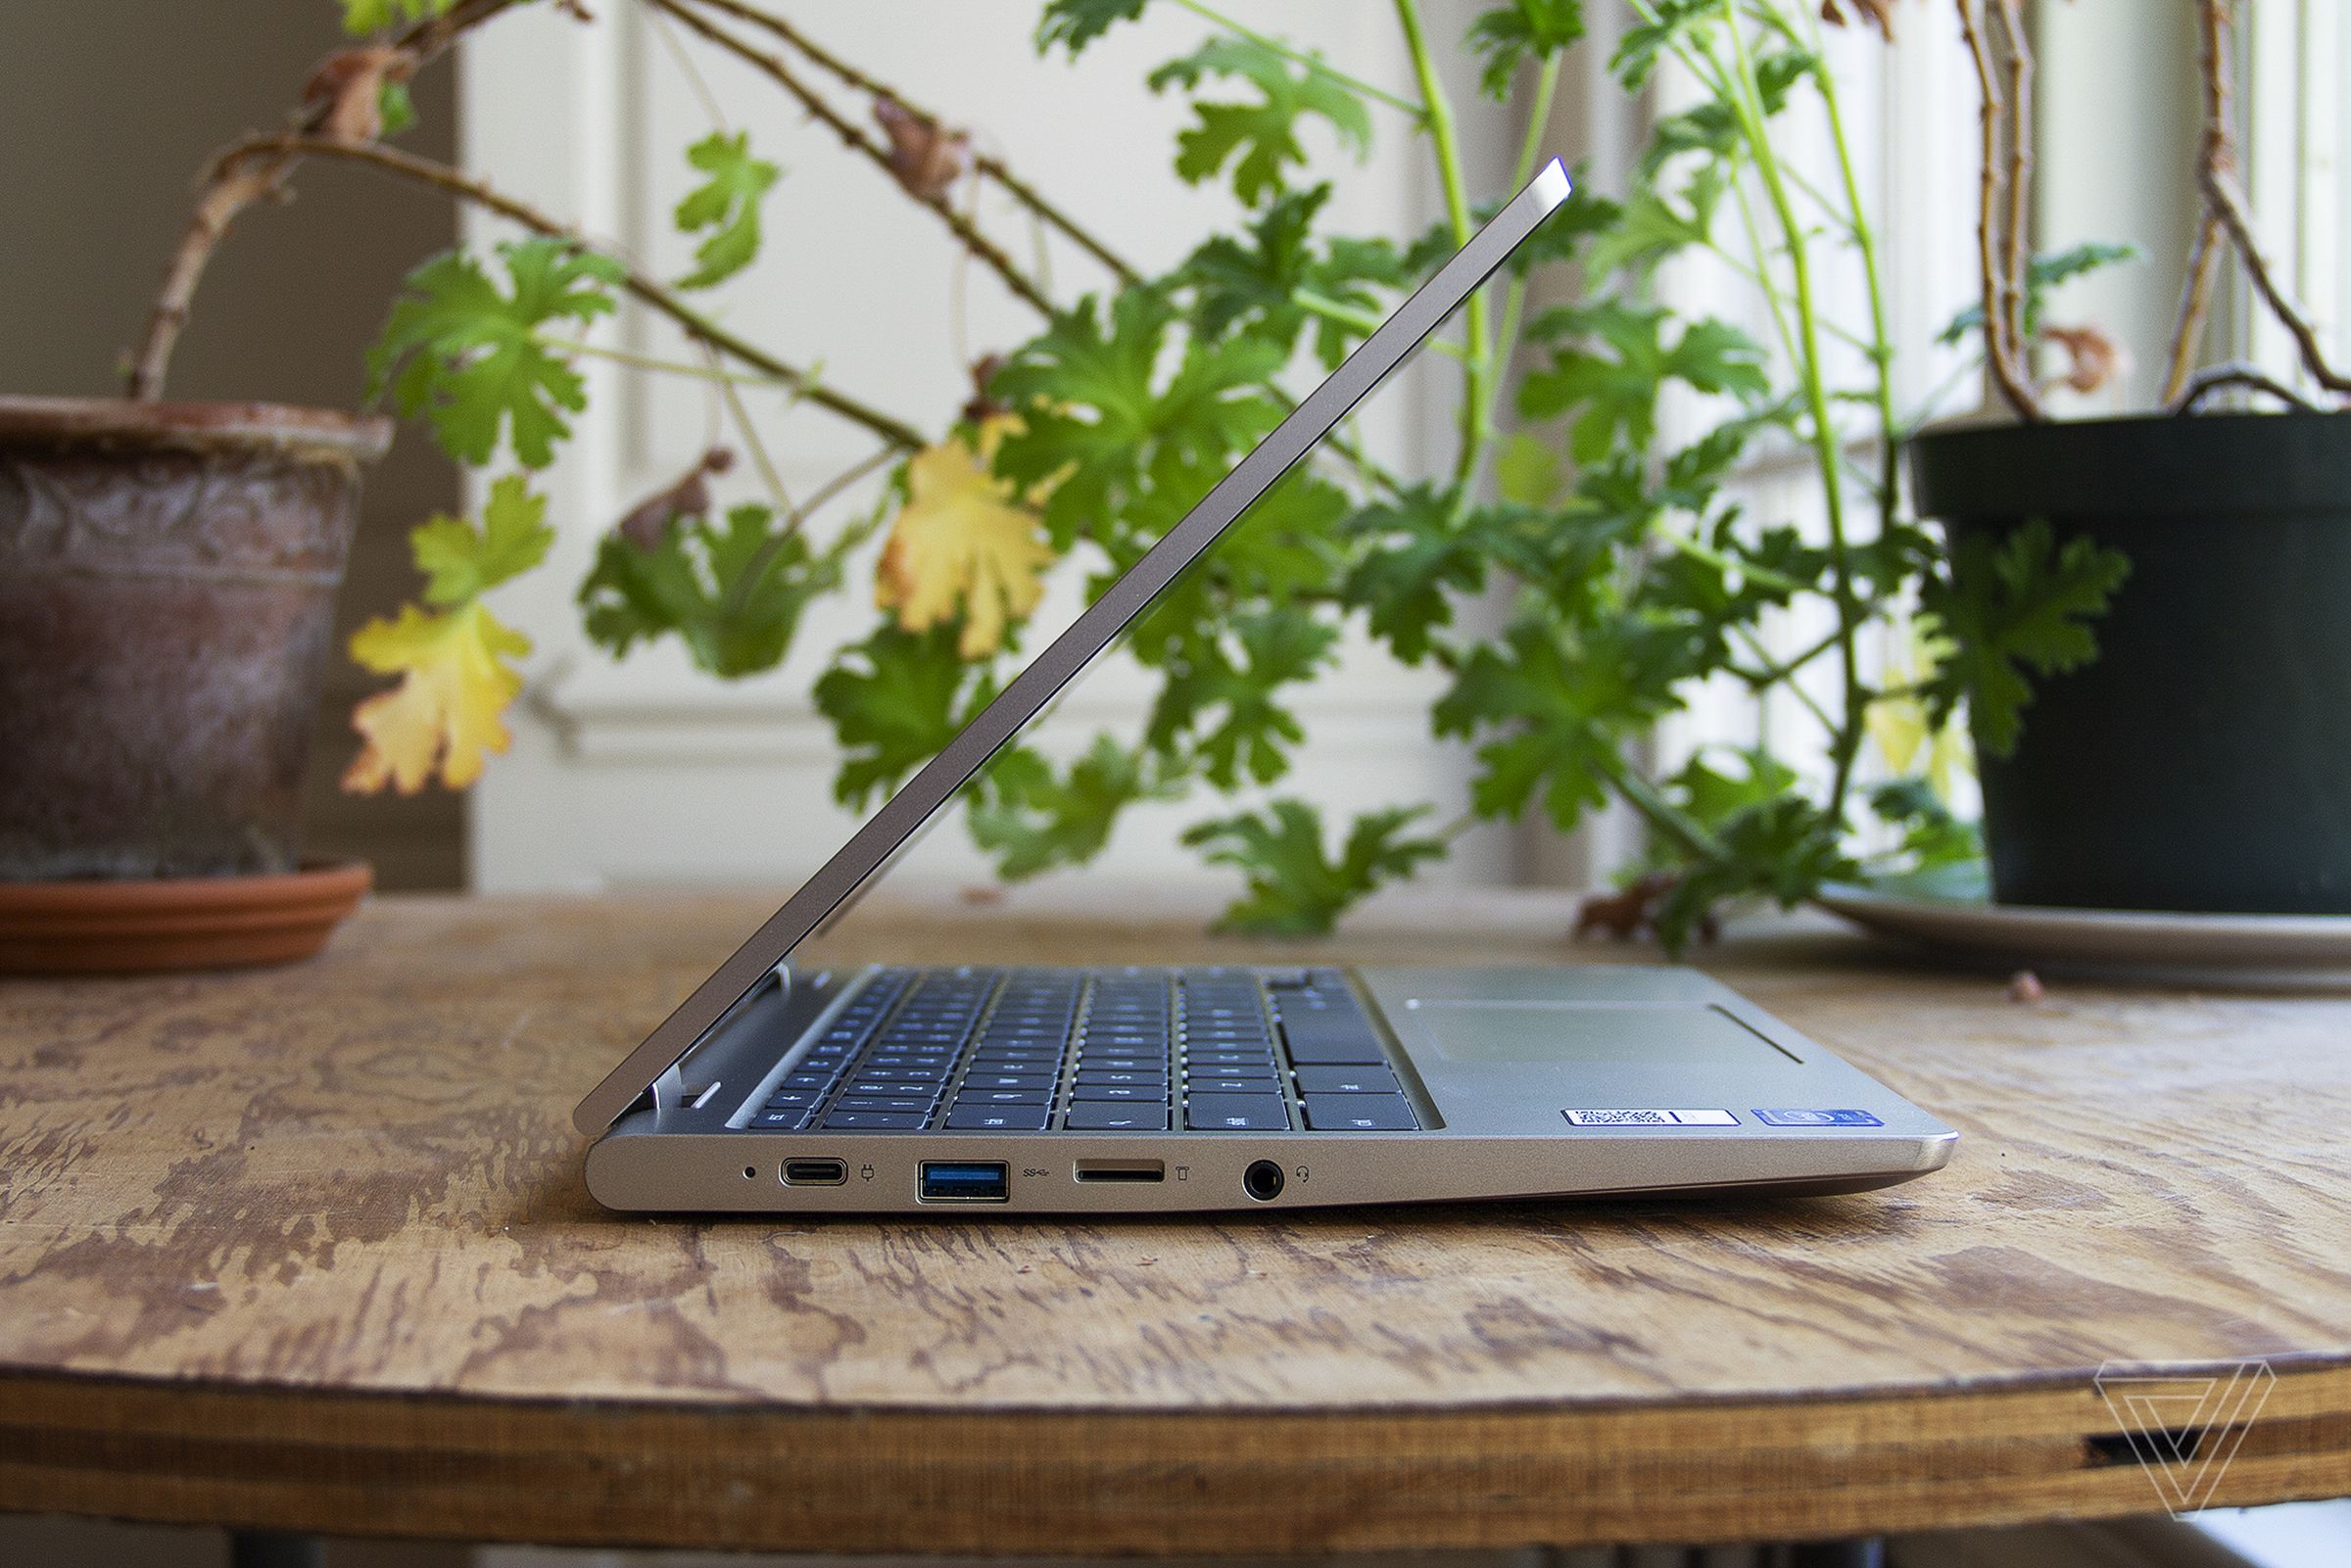 The Lenovo Ideapad Flex 3 Chromebook from the left side, half open on a table in front of two houseplants.